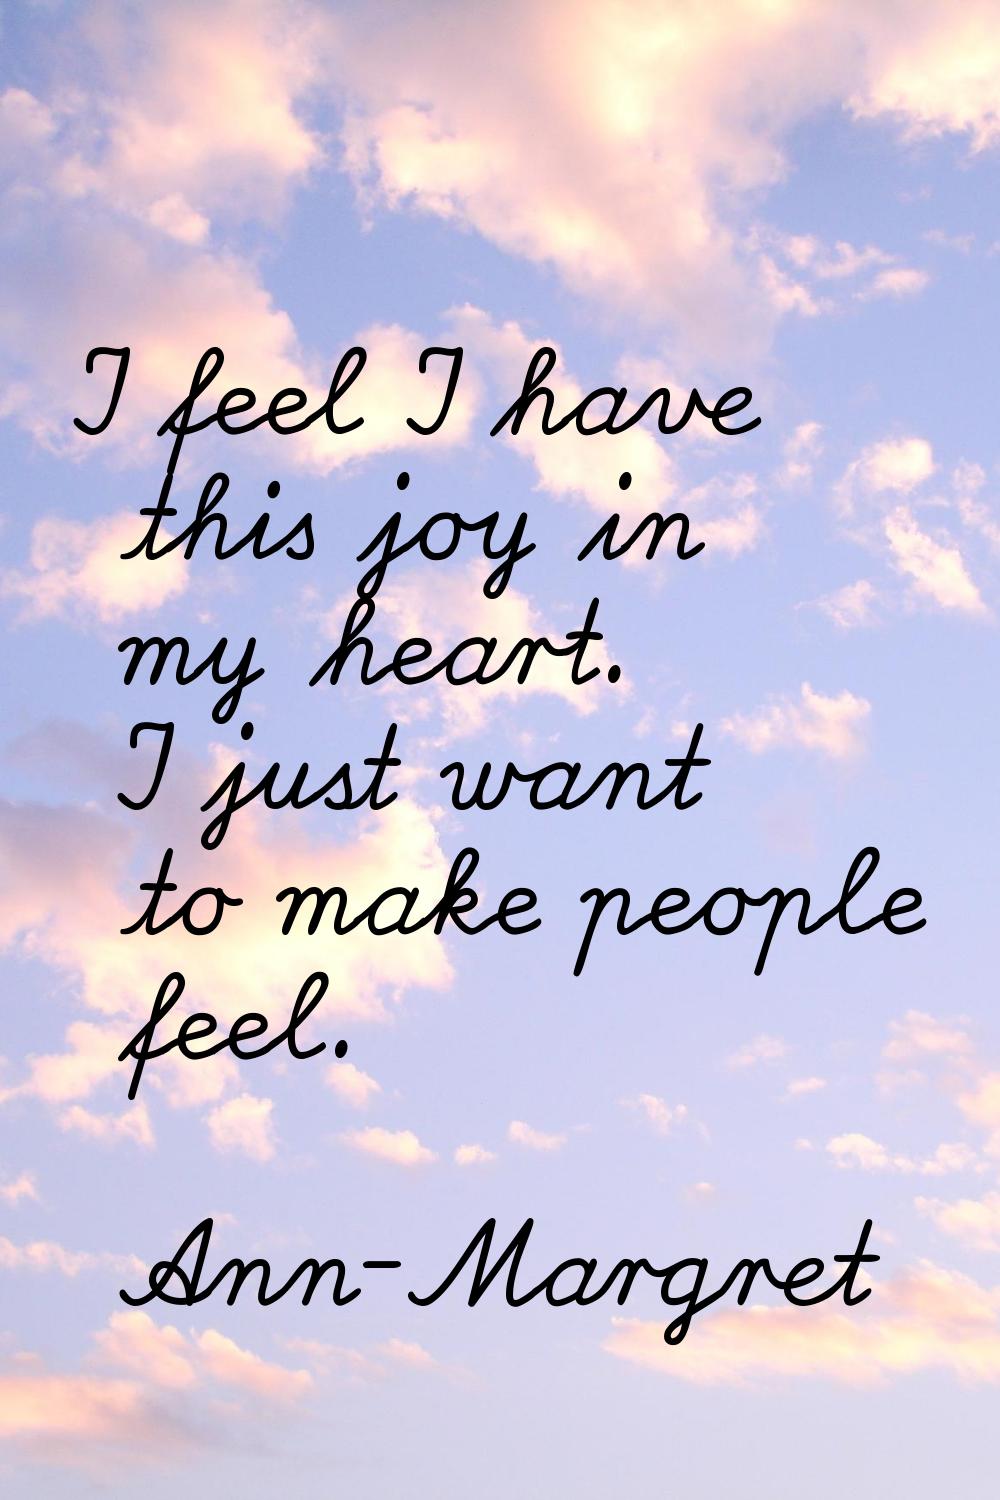 I feel I have this joy in my heart. I just want to make people feel.